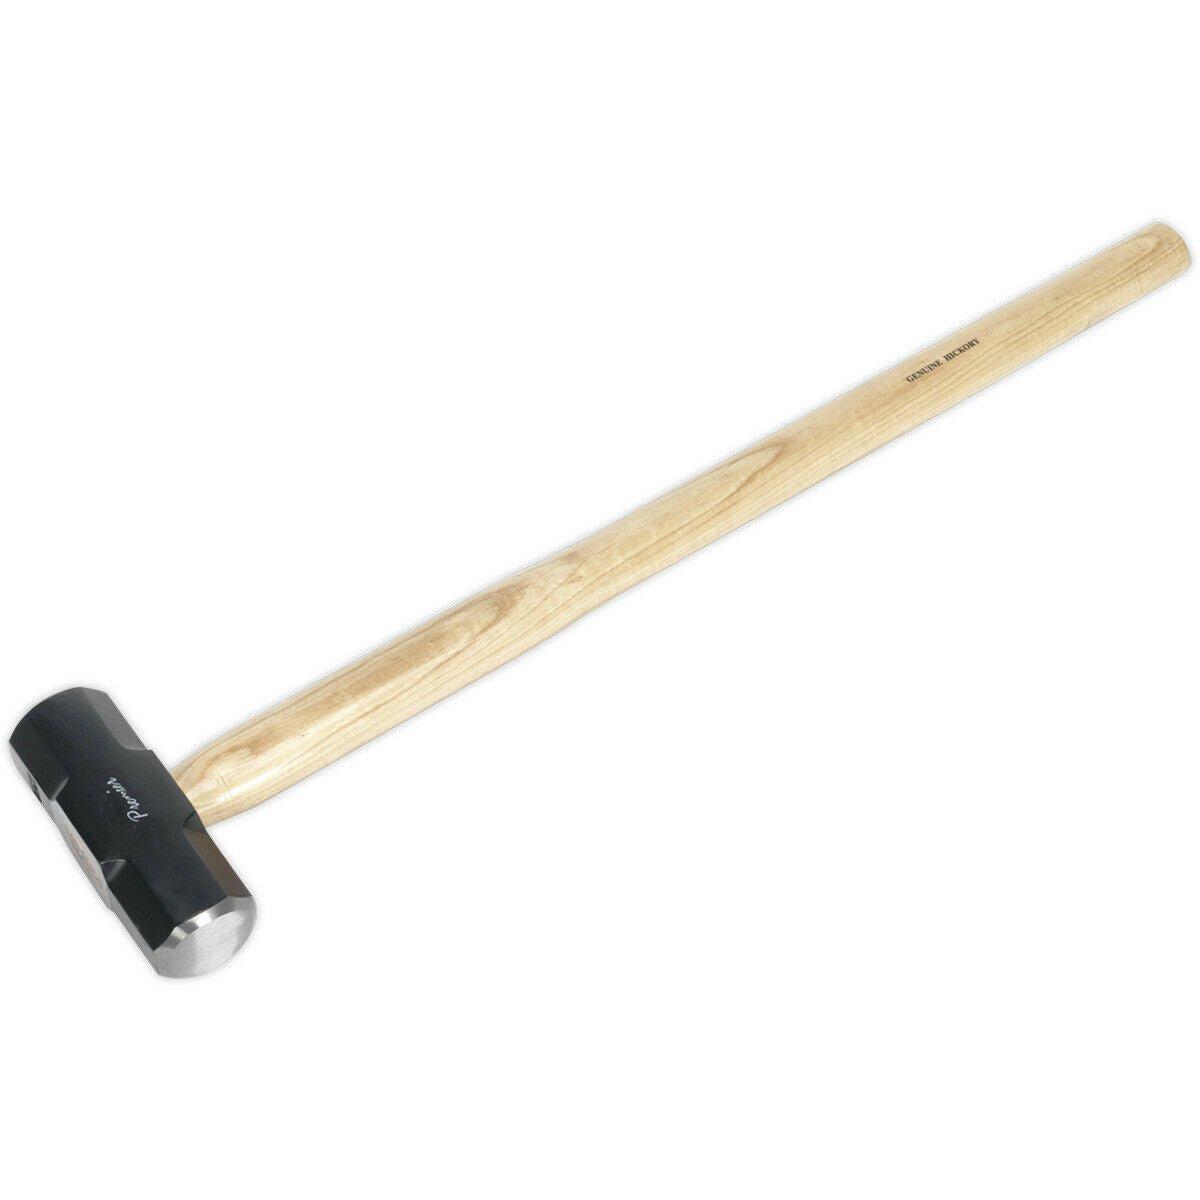 7lb Hardened Sledge Hammer - Hickory Wooden Shaft - Drop Forged Carbon Steel